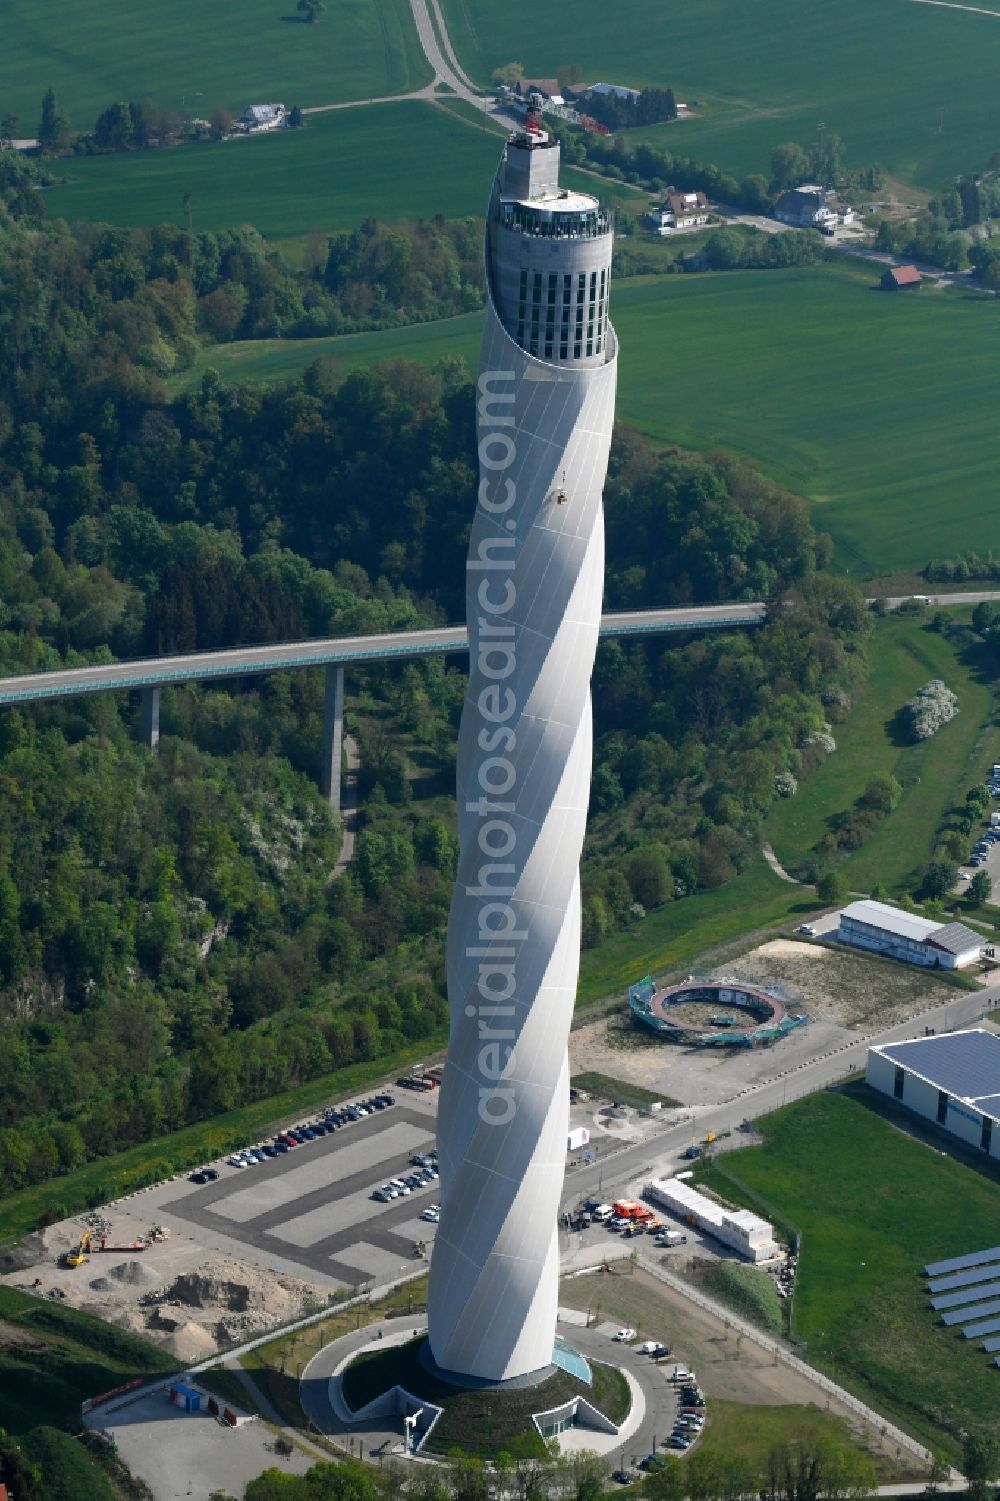 Rottweil from above - Site of the ThyssenKrupp testing tower for Speed elevators in Rottweil in Baden - Wuerttemberg. When finished the new landmark of the town of Rottweil will be the tallest structure in Baden-Wuerttemberg